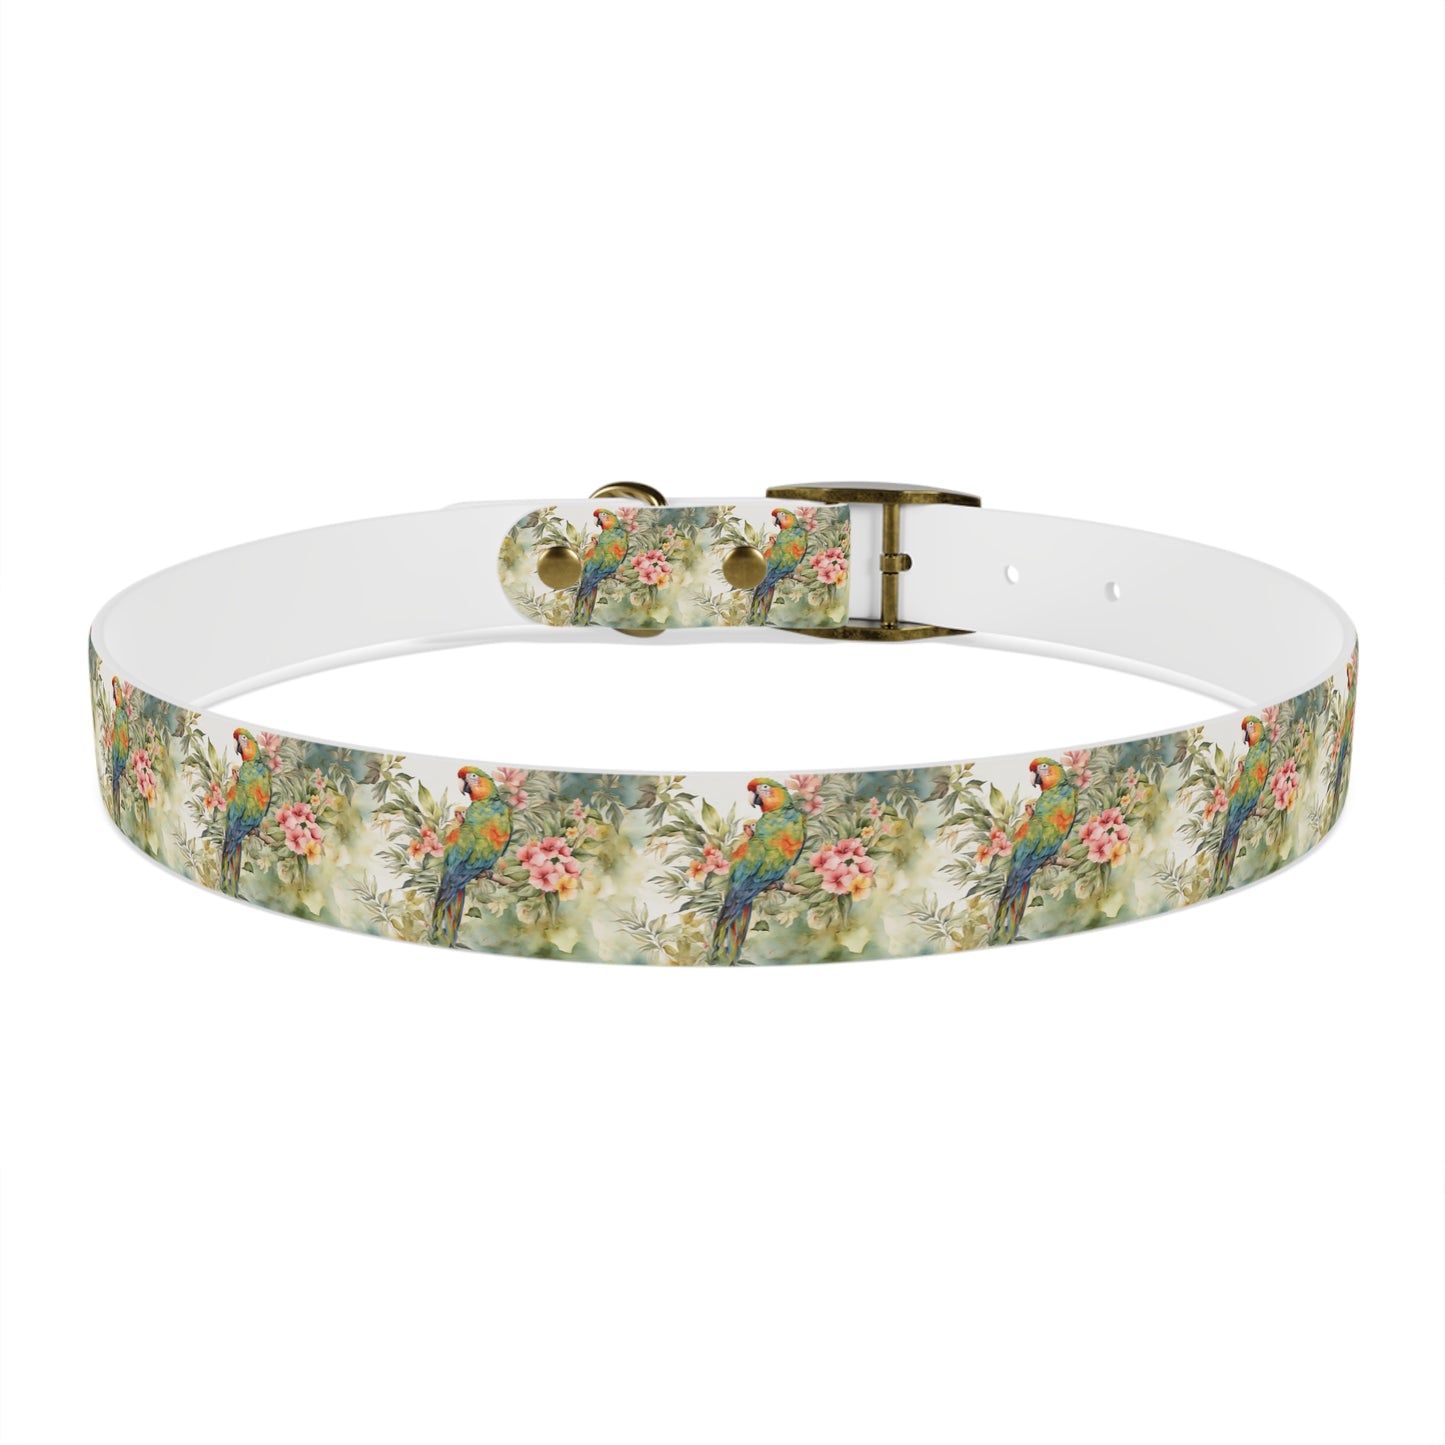 Parrot & Hibiscus Watercolor Pattern Dog Collar